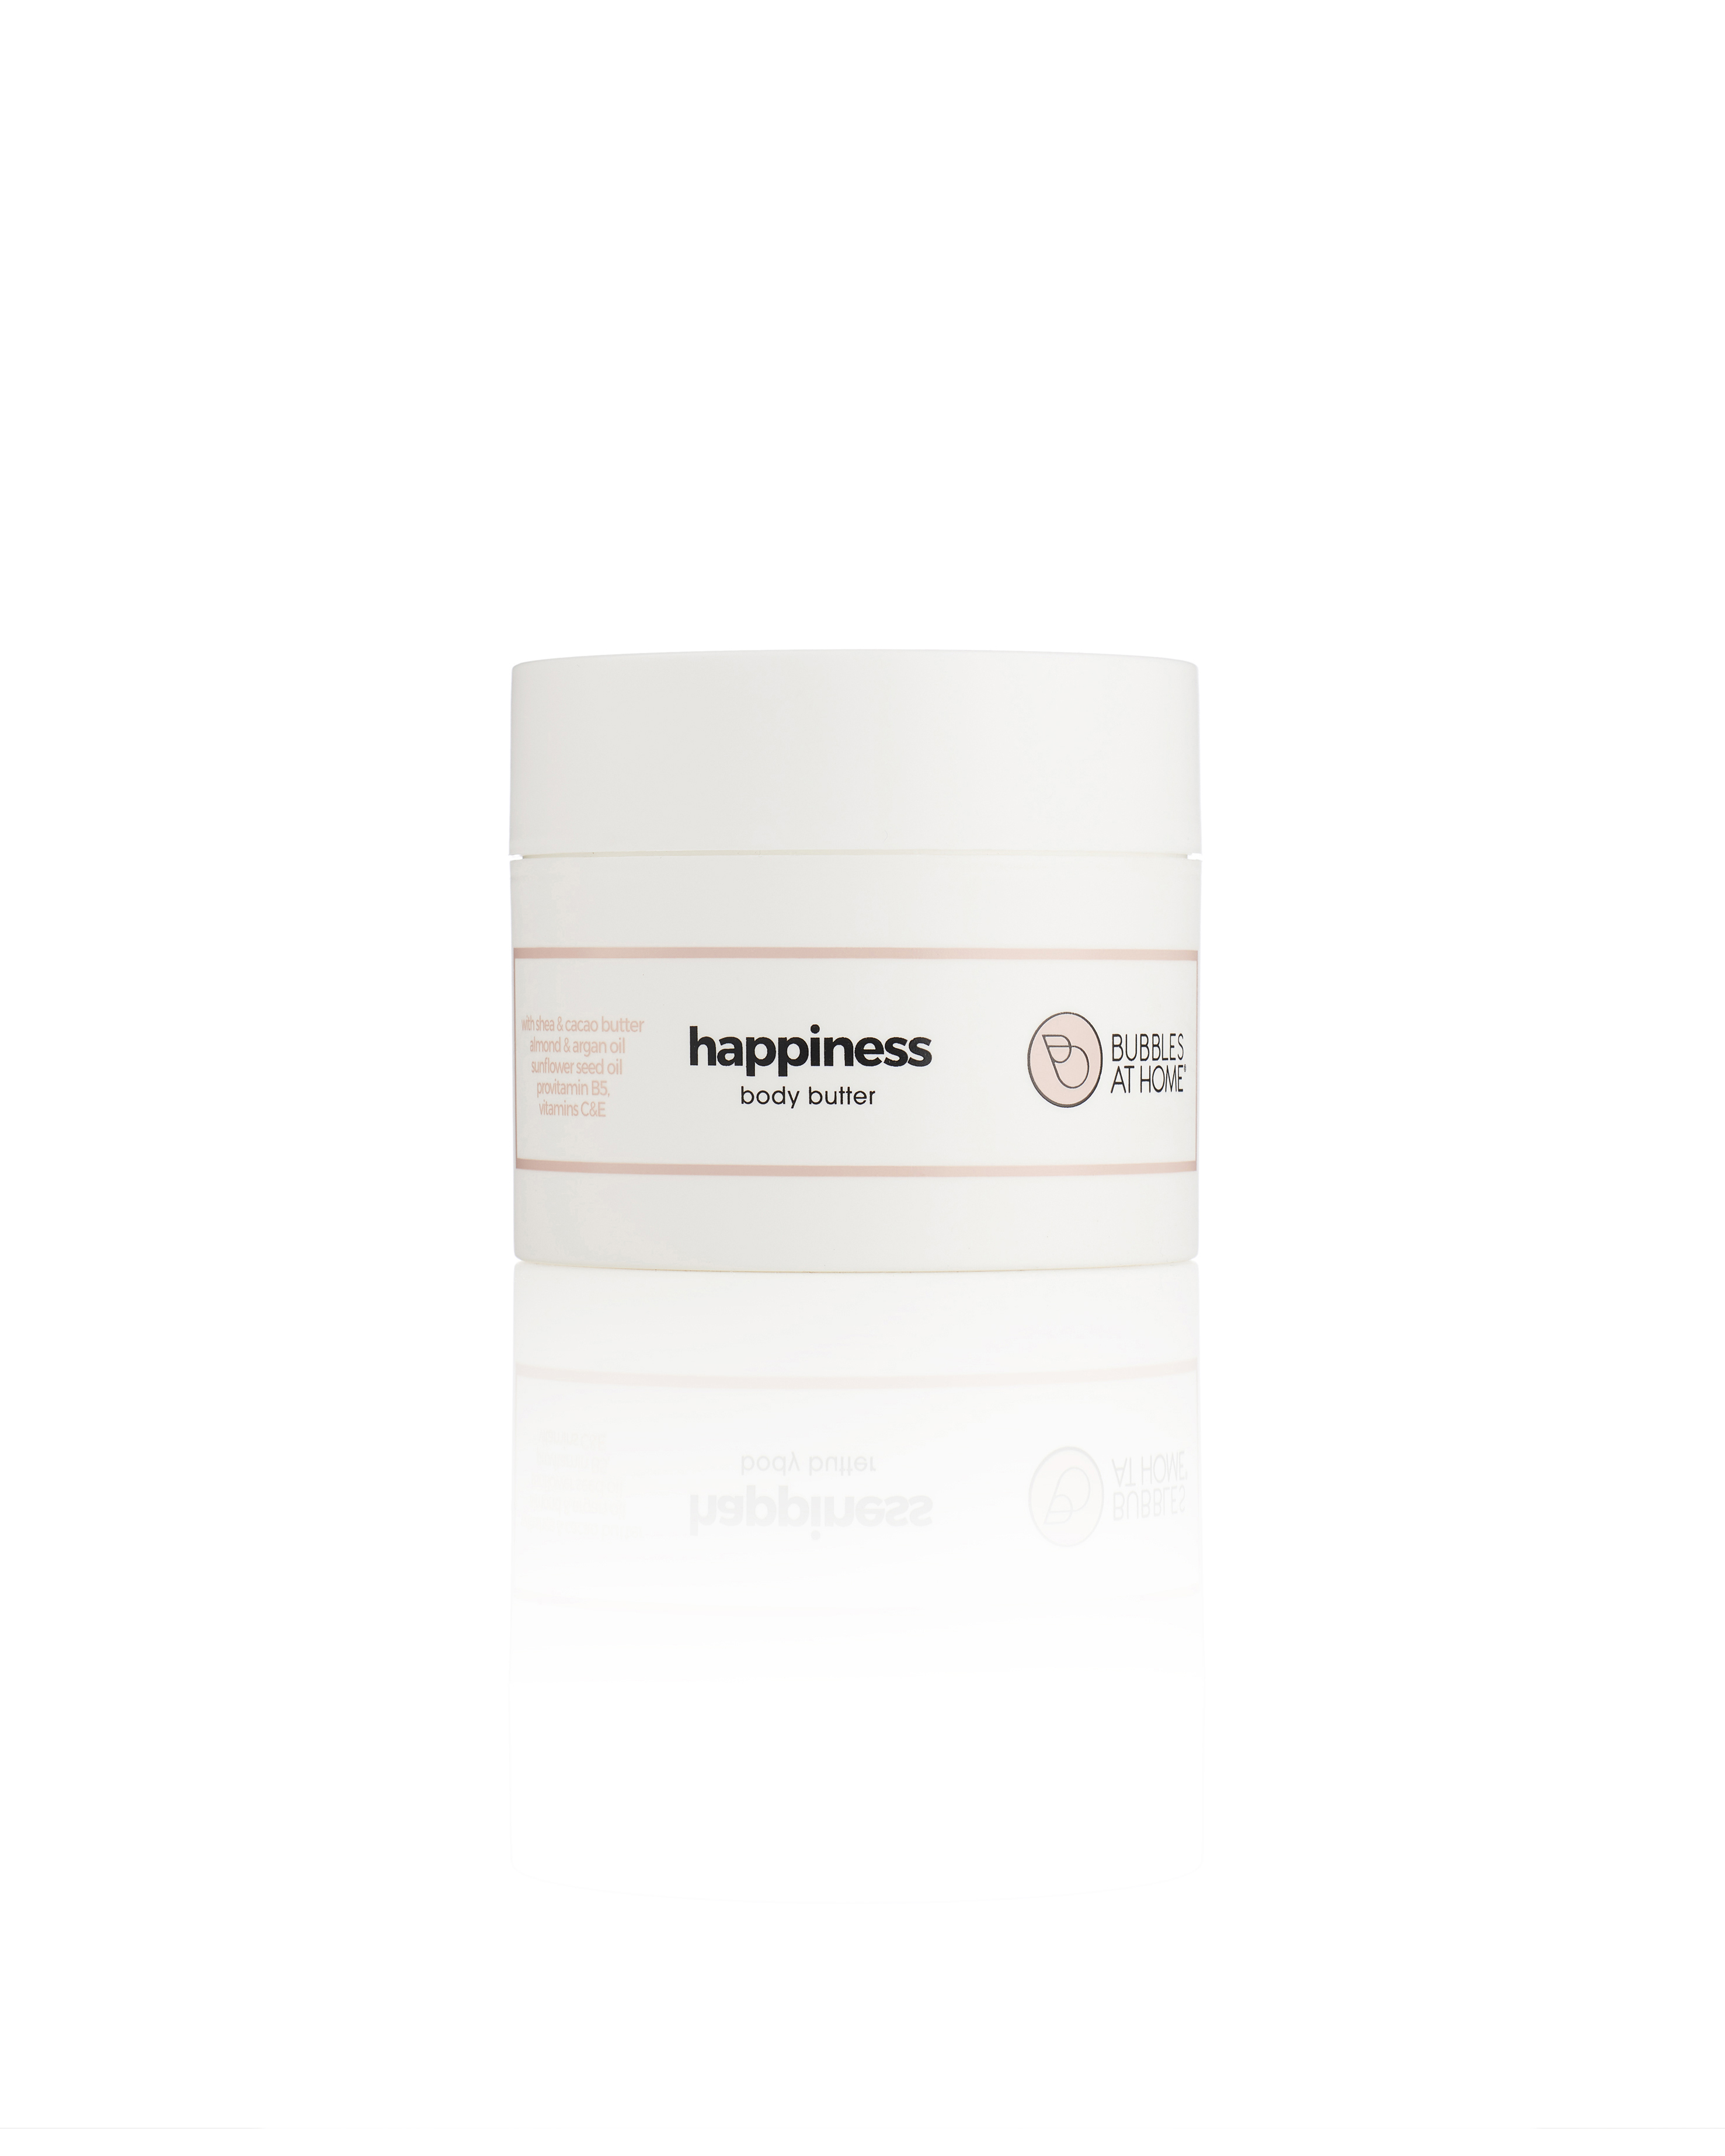 Happiness body butter